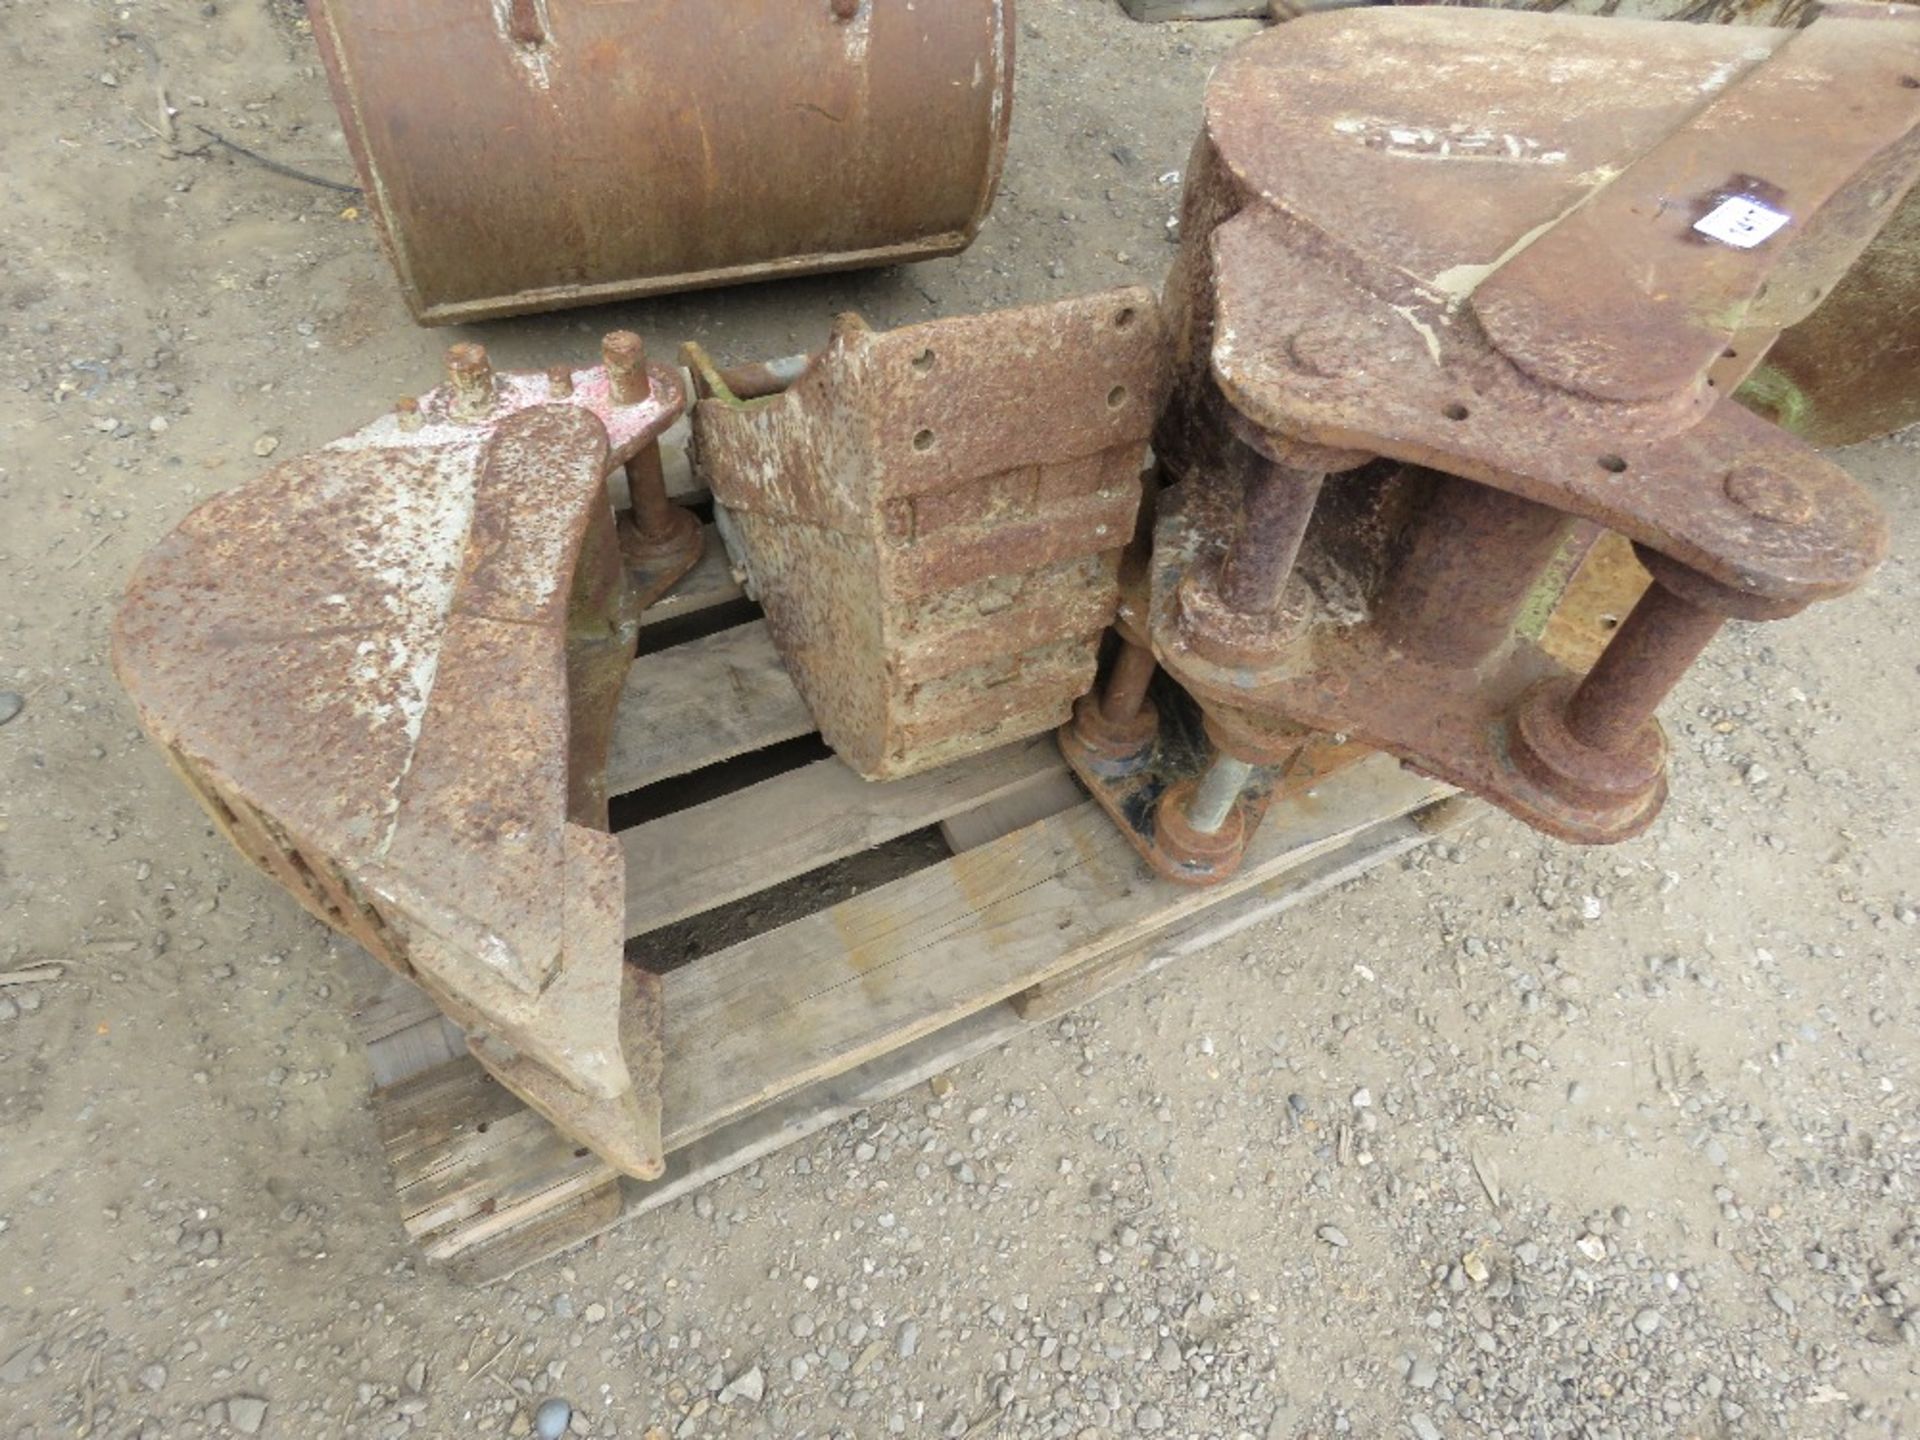 4 X ASSORTED MINI EXCAVATOR BUCKETS. DIRECT FROM A LOCAL GROUNDWORKS COMPANY AS PART OF THEIR RES